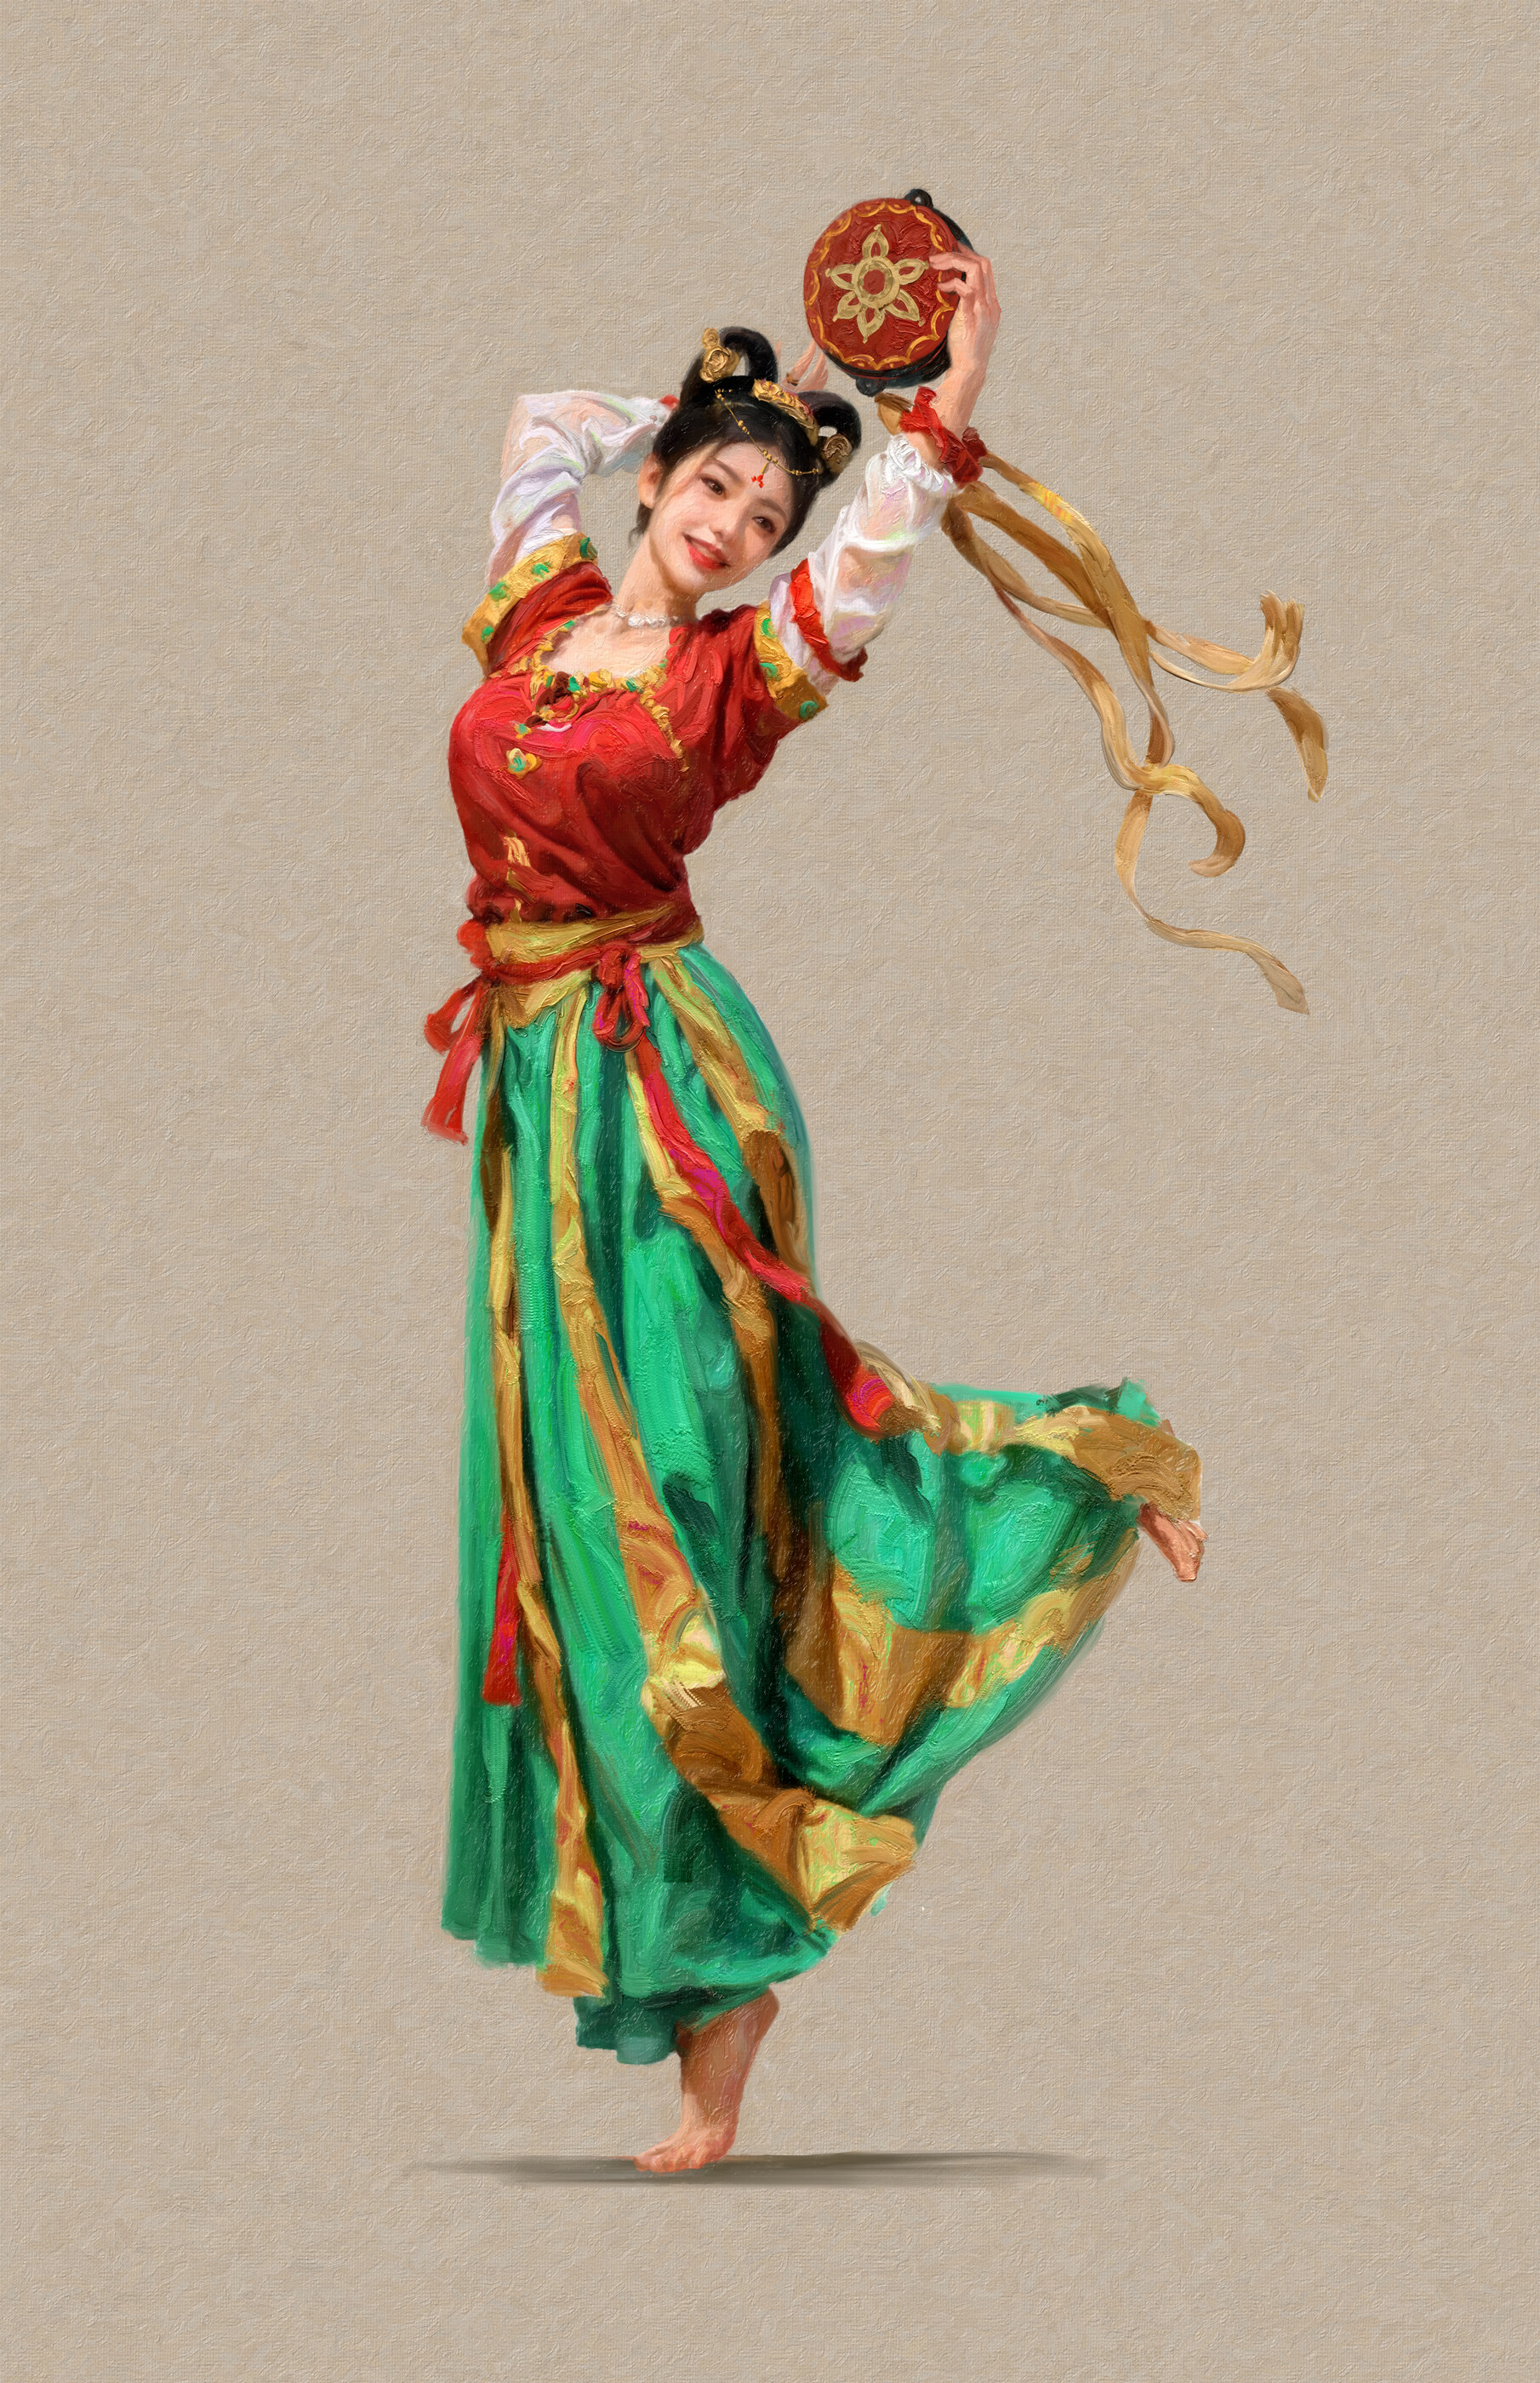 General 1810x2800 women traditional art dancing smiling traditional clothing Asian beige background standing simple background dress minimalism hairbun standing on one leg painting